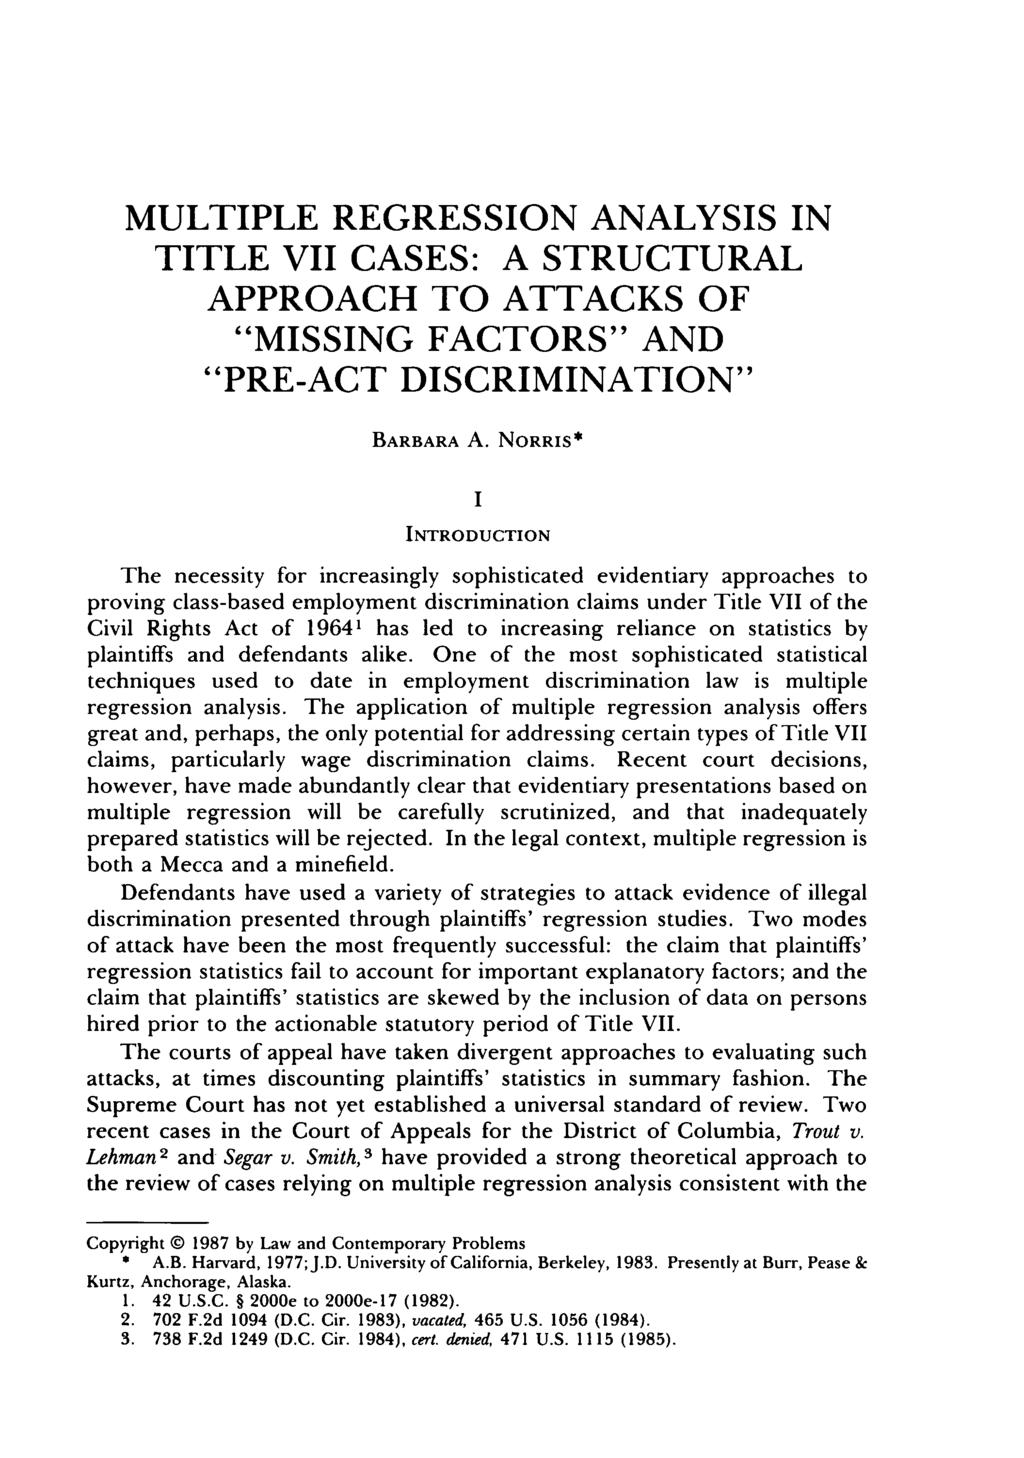 MULTIPLE REGRESSION ANALYSIS IN TITLE VII CASES: A STRUCTURAL APPROACH TO ATTACKS OF "MISSING FACTORS" AND "PRE-ACT DISCRIMINATION" BARBARA A.